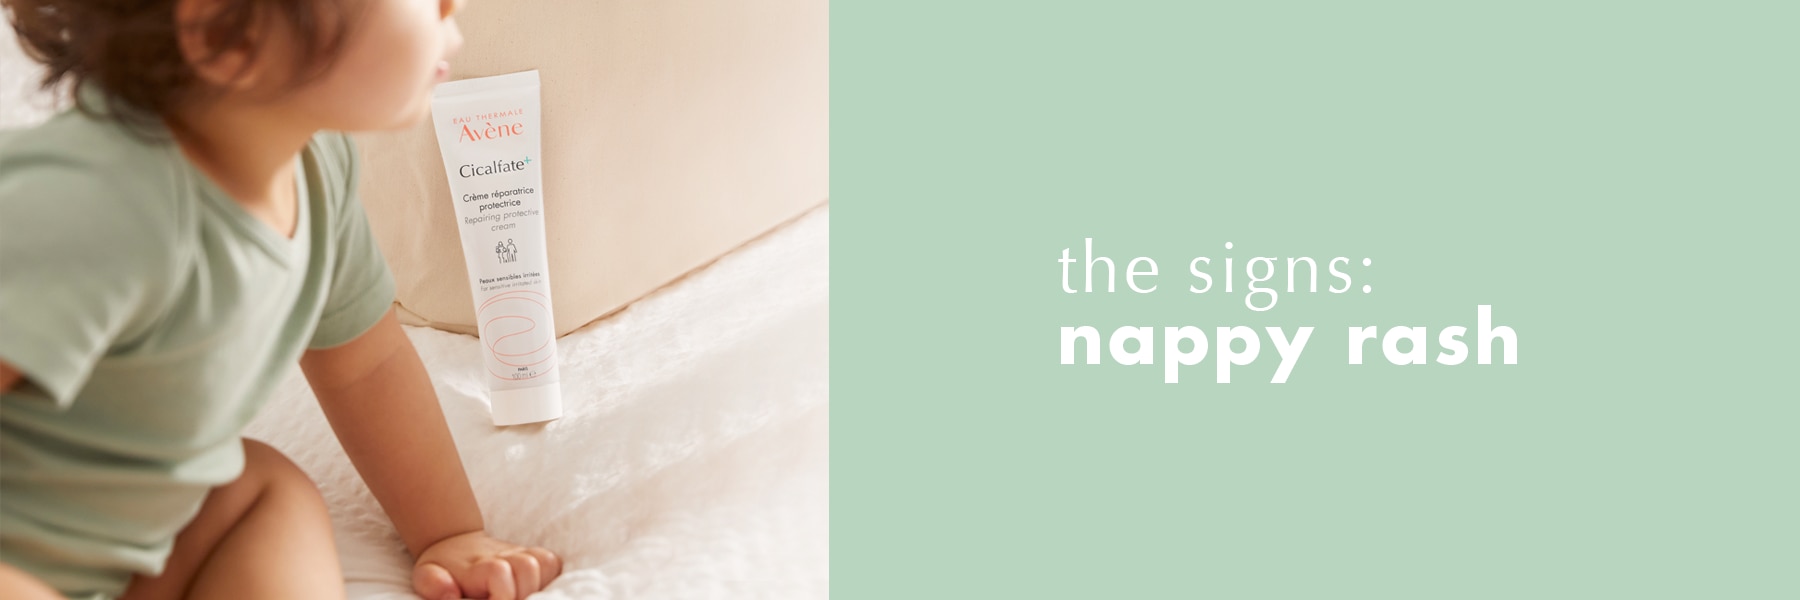 The signs of nappy rash